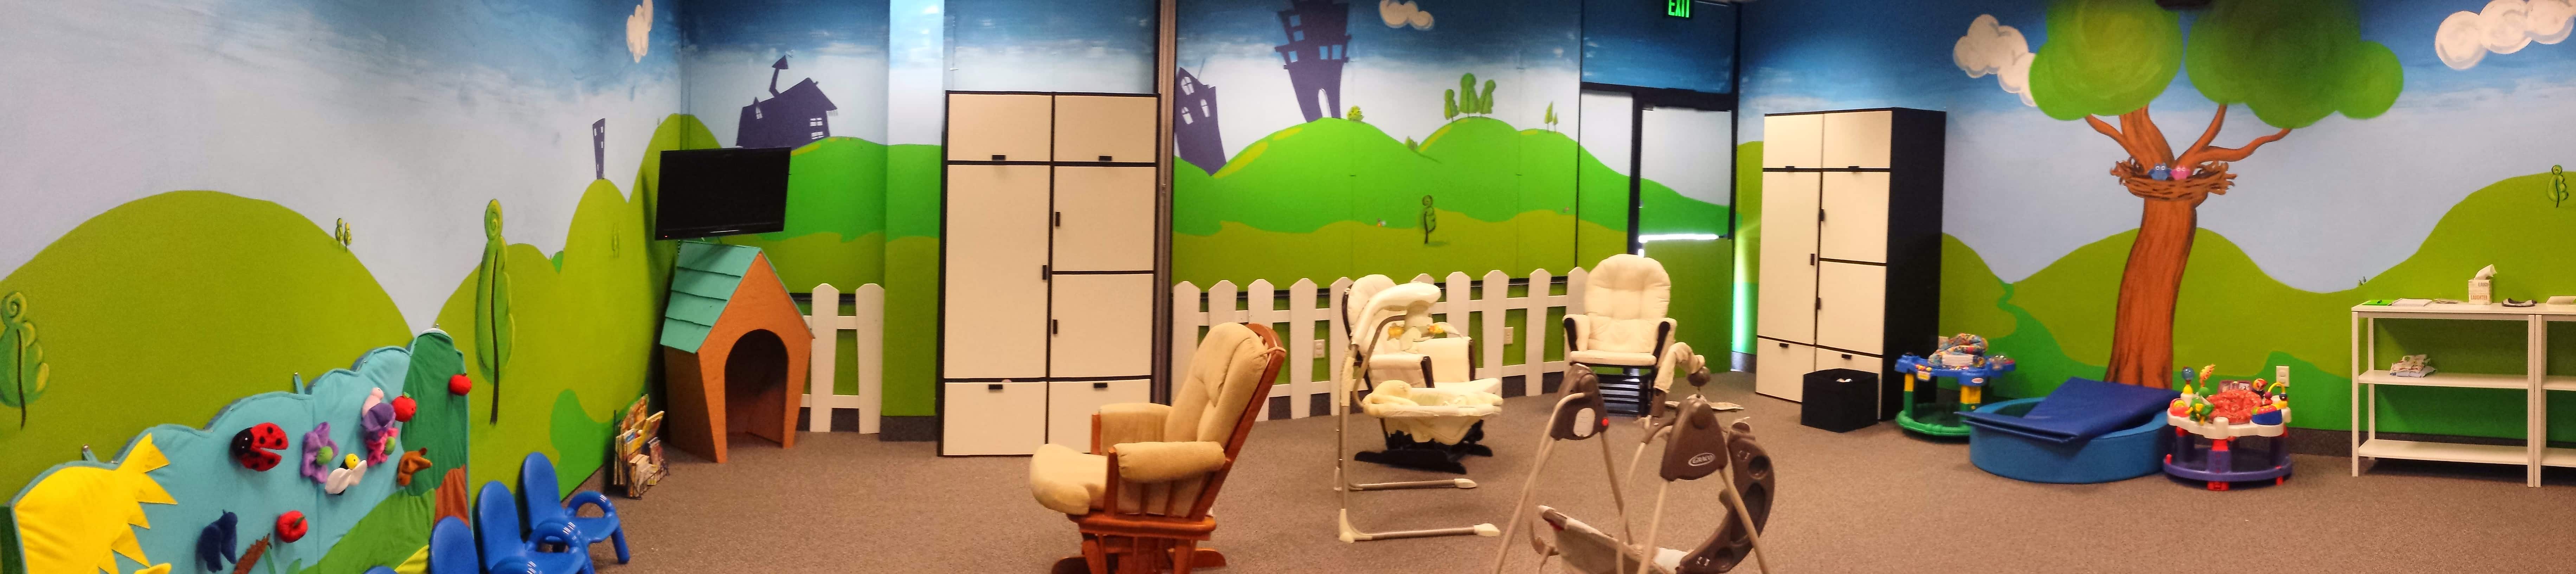 Children's Ministry Space